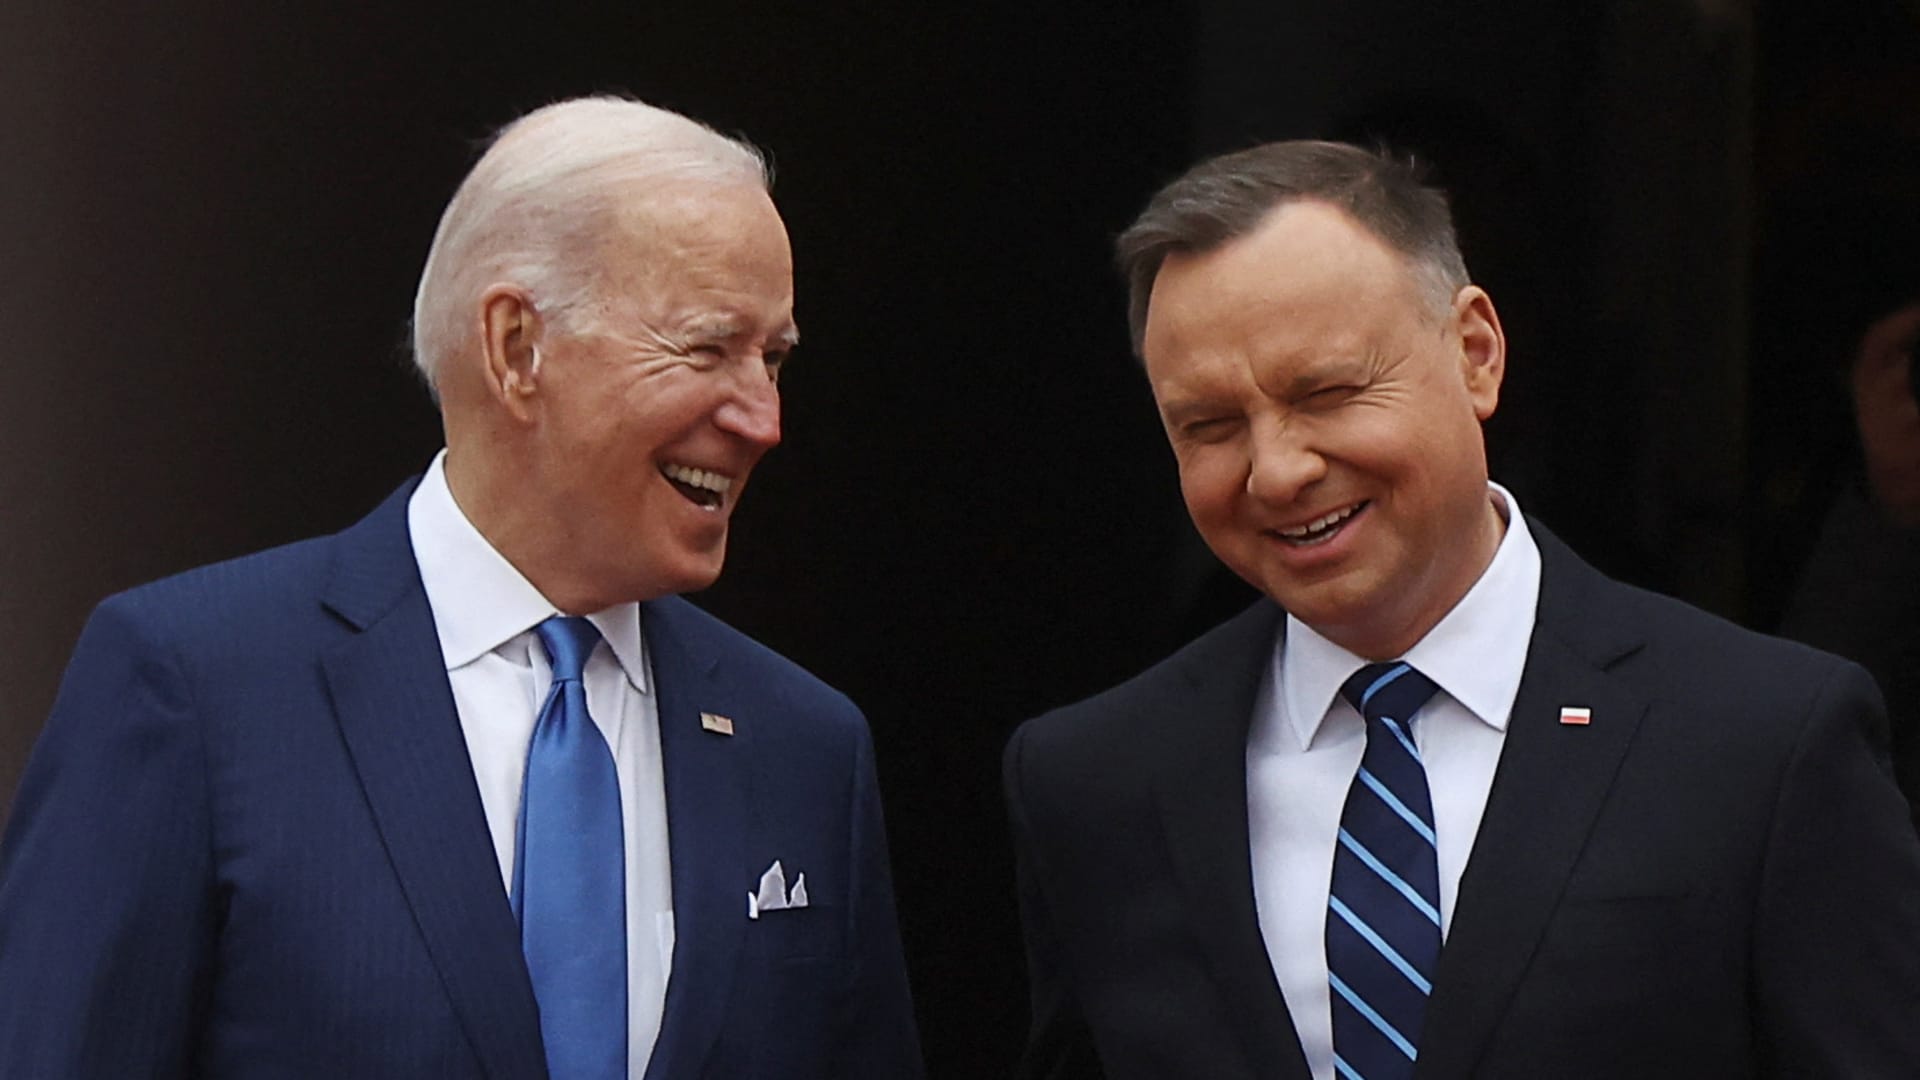 Polish President Andrzej Duda and the U.S. President Joe Biden interact, as the Russian invasion of Ukraine continues, outside the Presidential Palace in Warsaw, Poland March 26, 2022. 